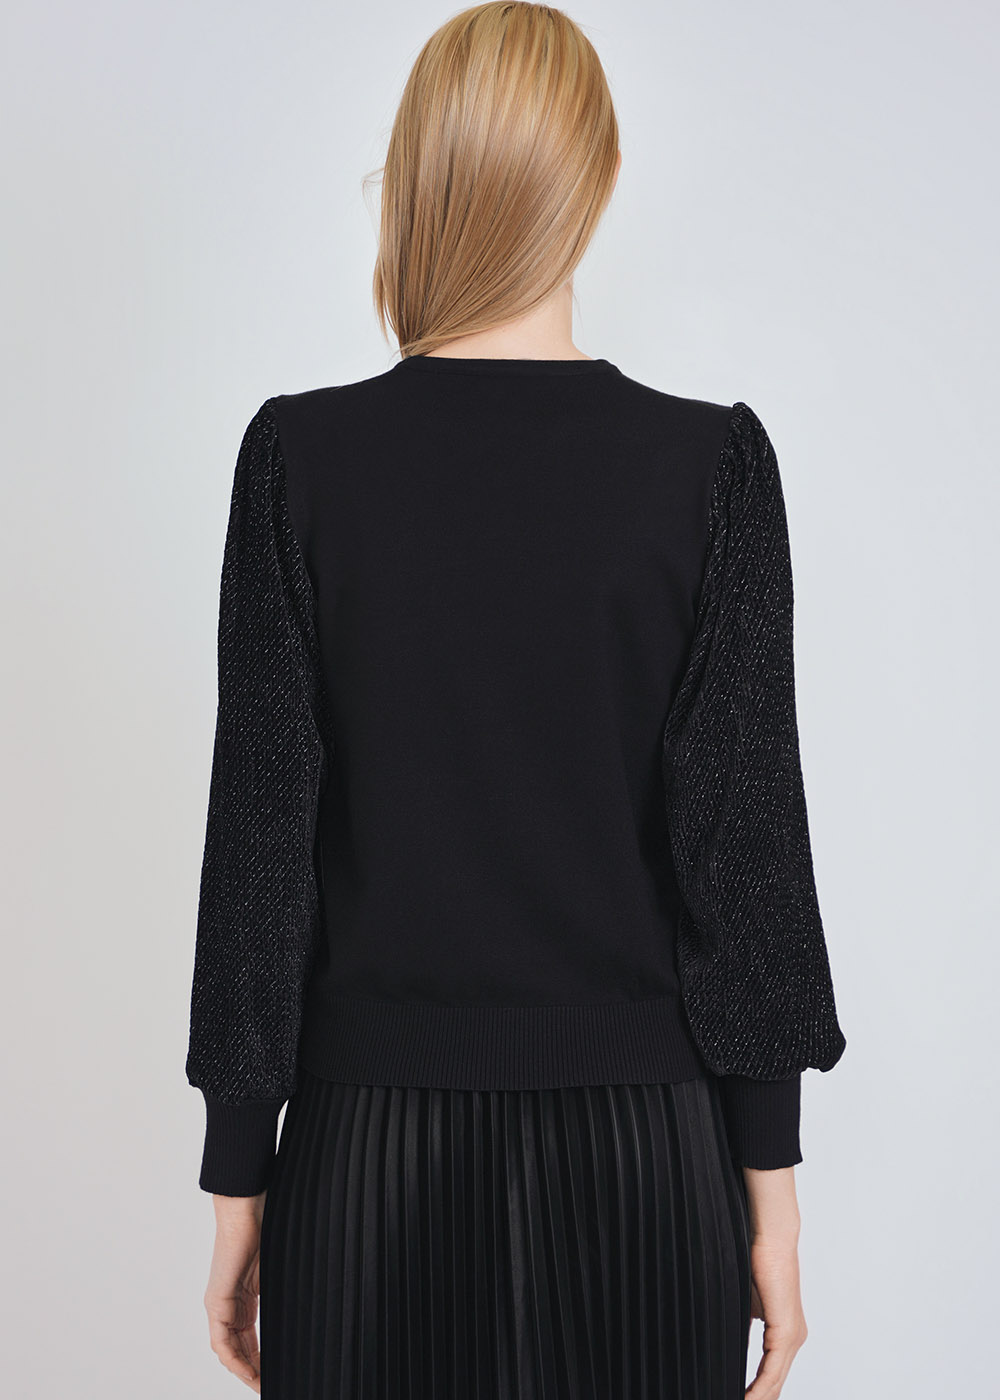 Edgy Black Knit Top with Eye-catching Voluminous Sleeves